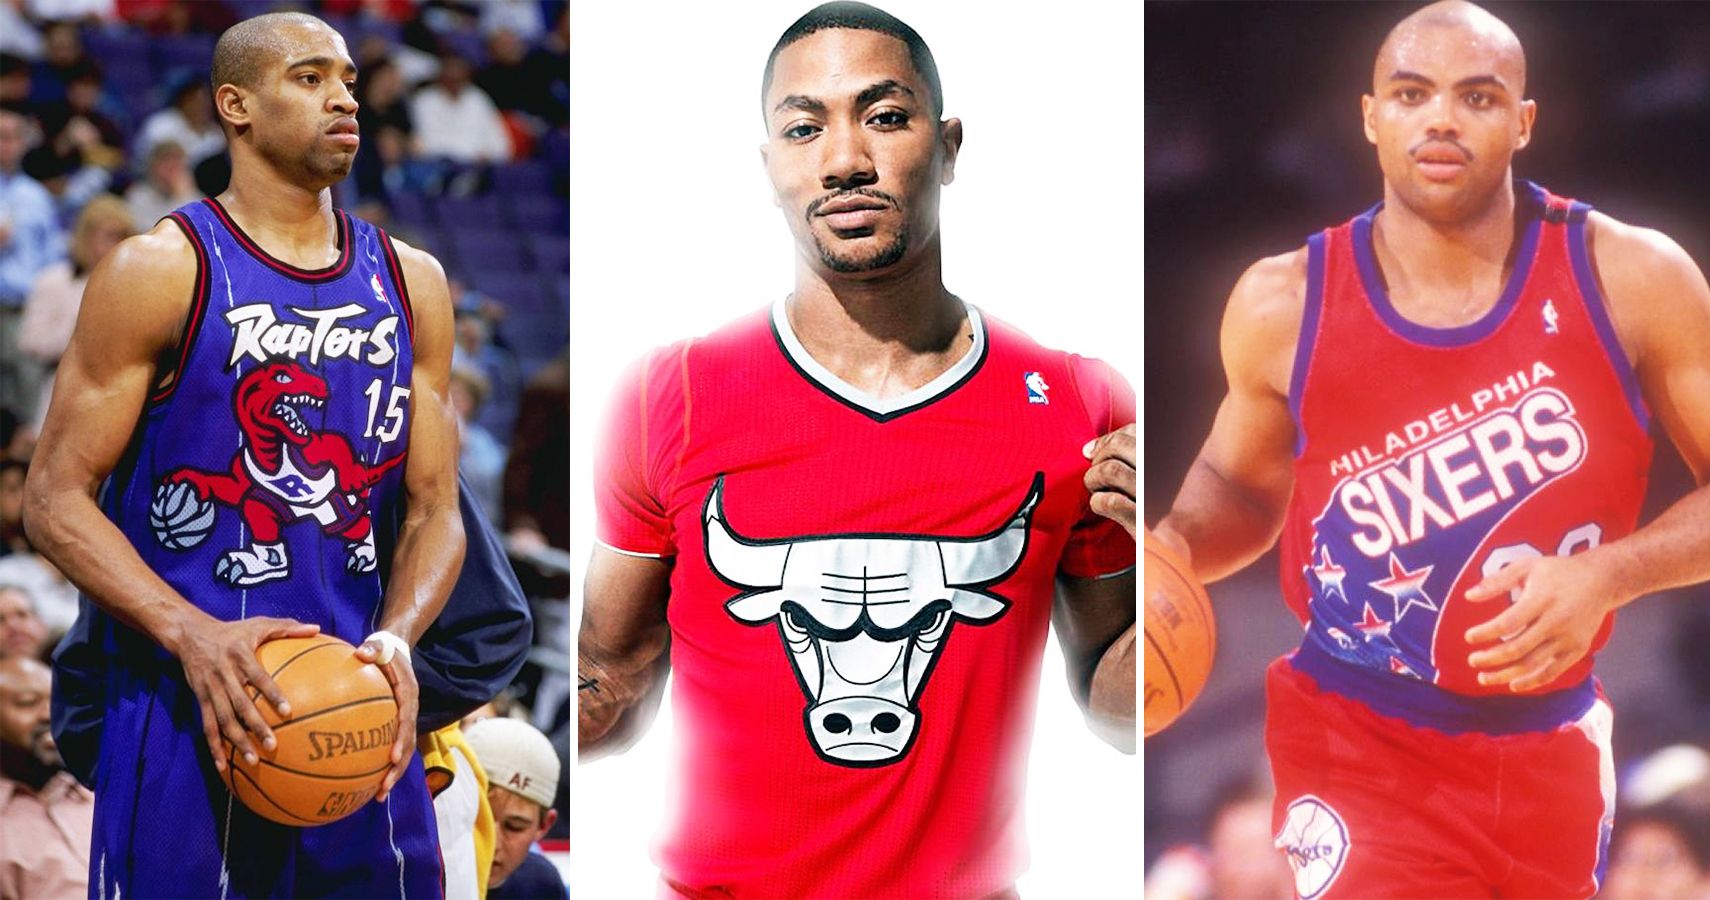 Every Nba Team S Jersey That Never Should Have Been Seen On The Court